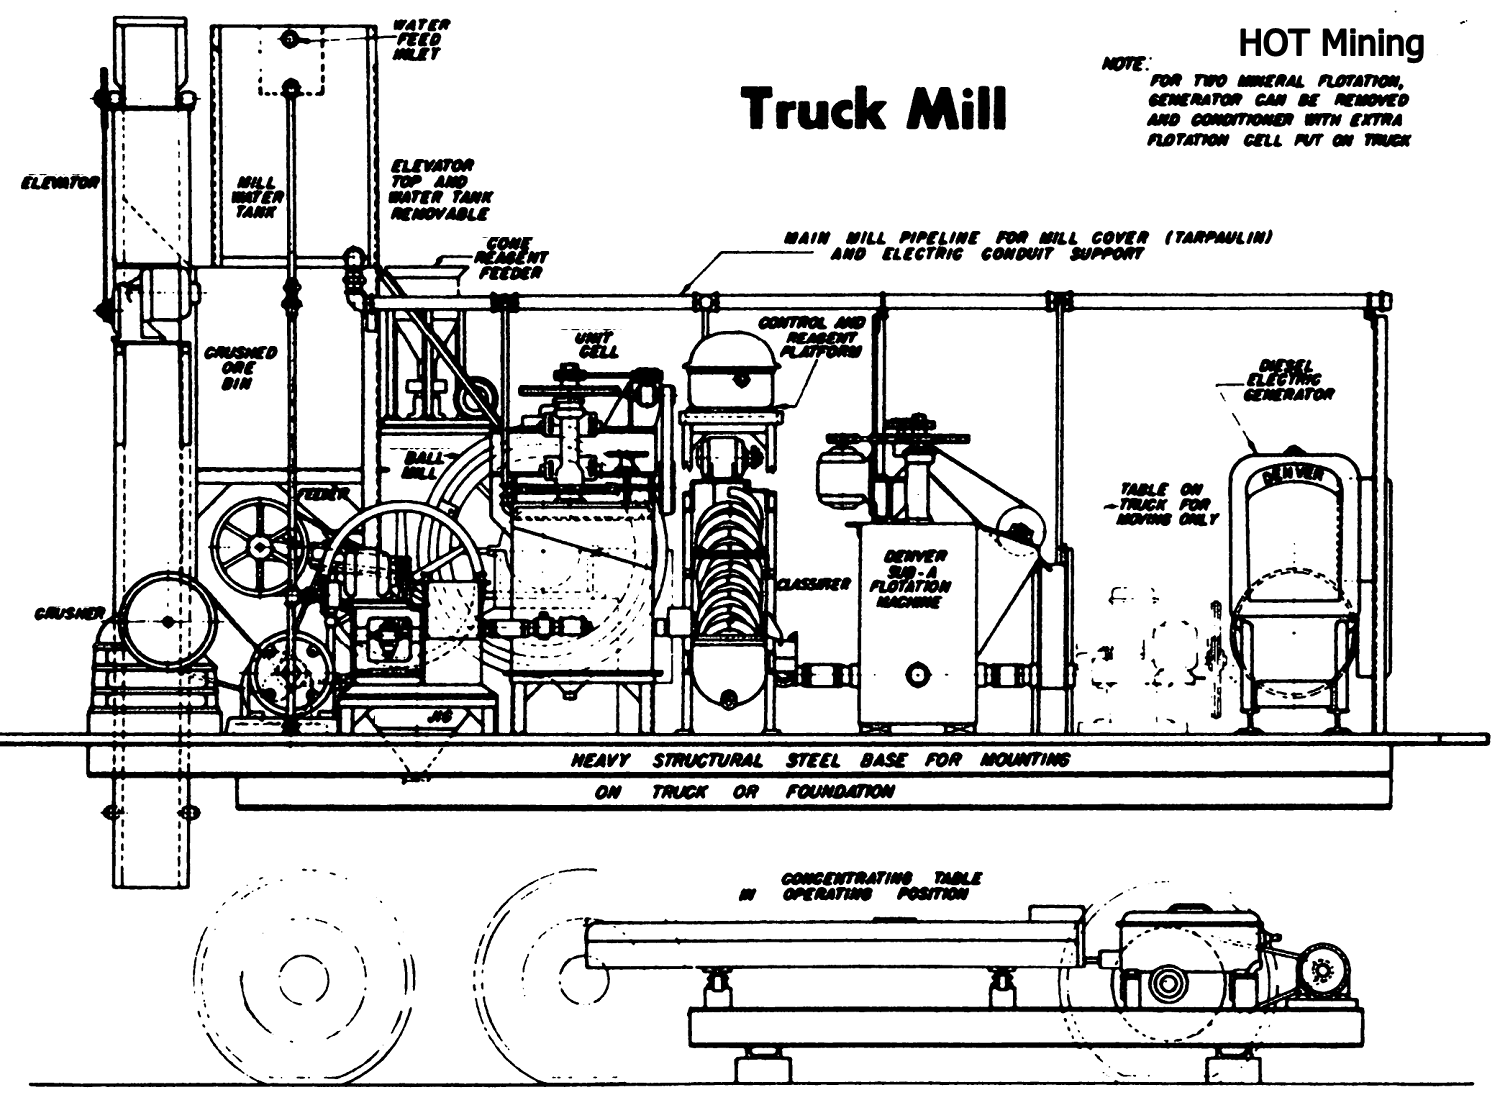 Mobile-Process-Plant-in-Pickup-Truck-1